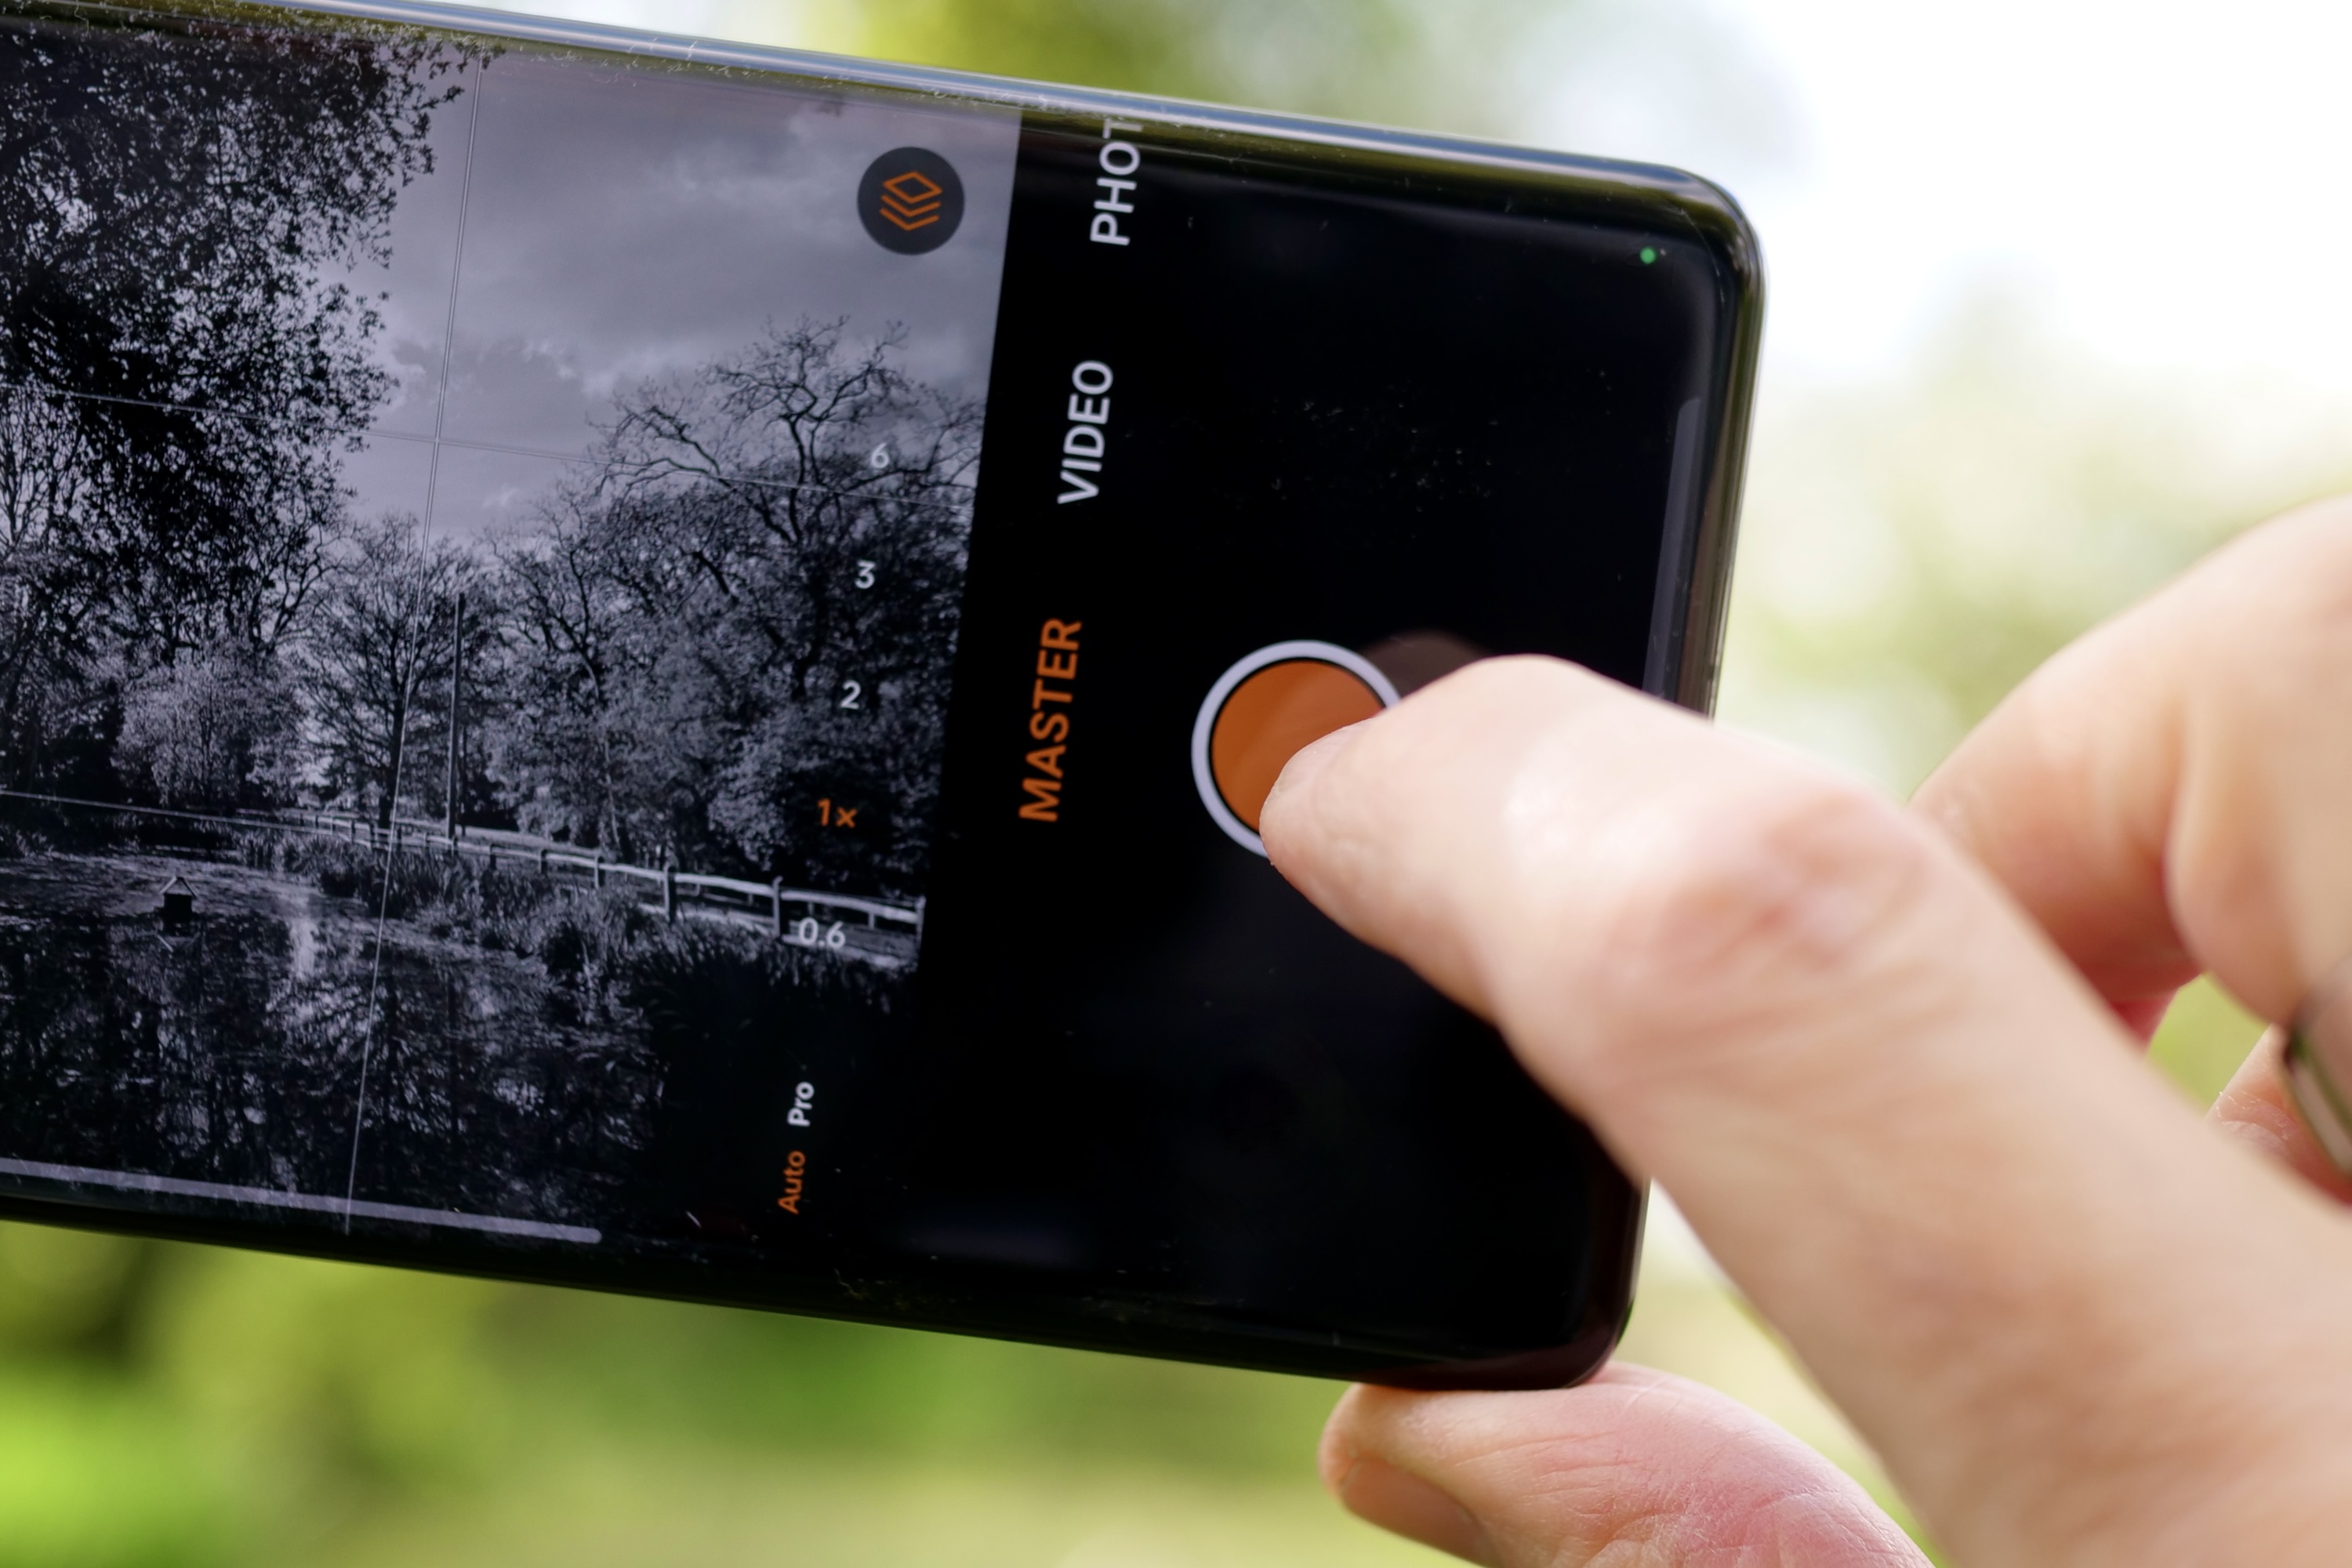 How one special feature changed my smartphone photos forever